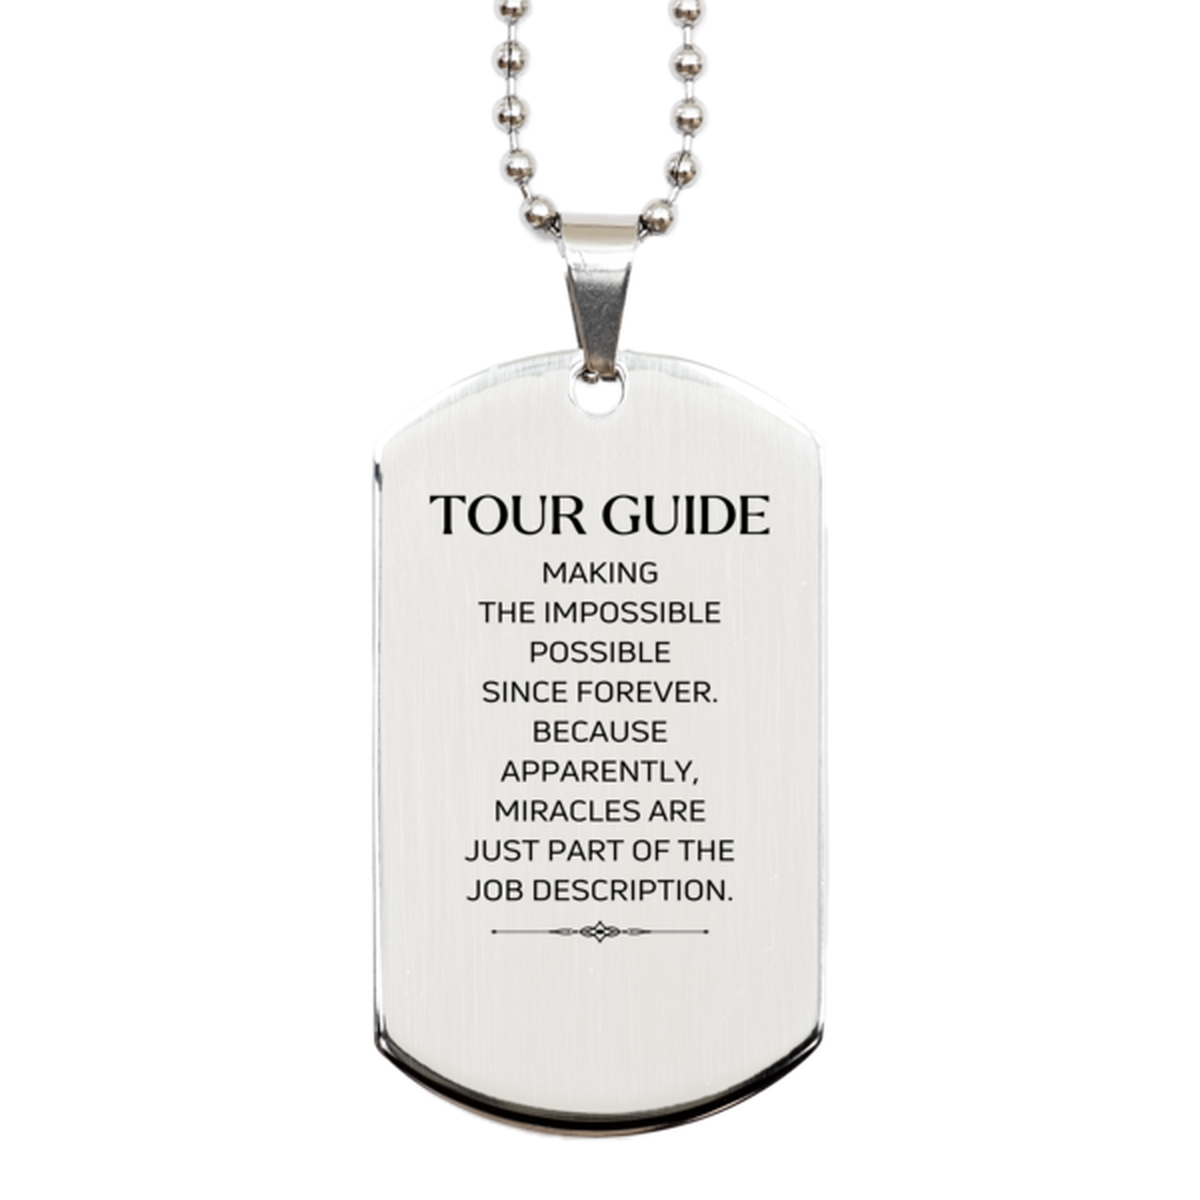 Funny Tour Guide Gifts, Miracles are just part of the job description, Inspirational Birthday Silver Dog Tag For Tour Guide, Men, Women, Coworkers, Friends, Boss